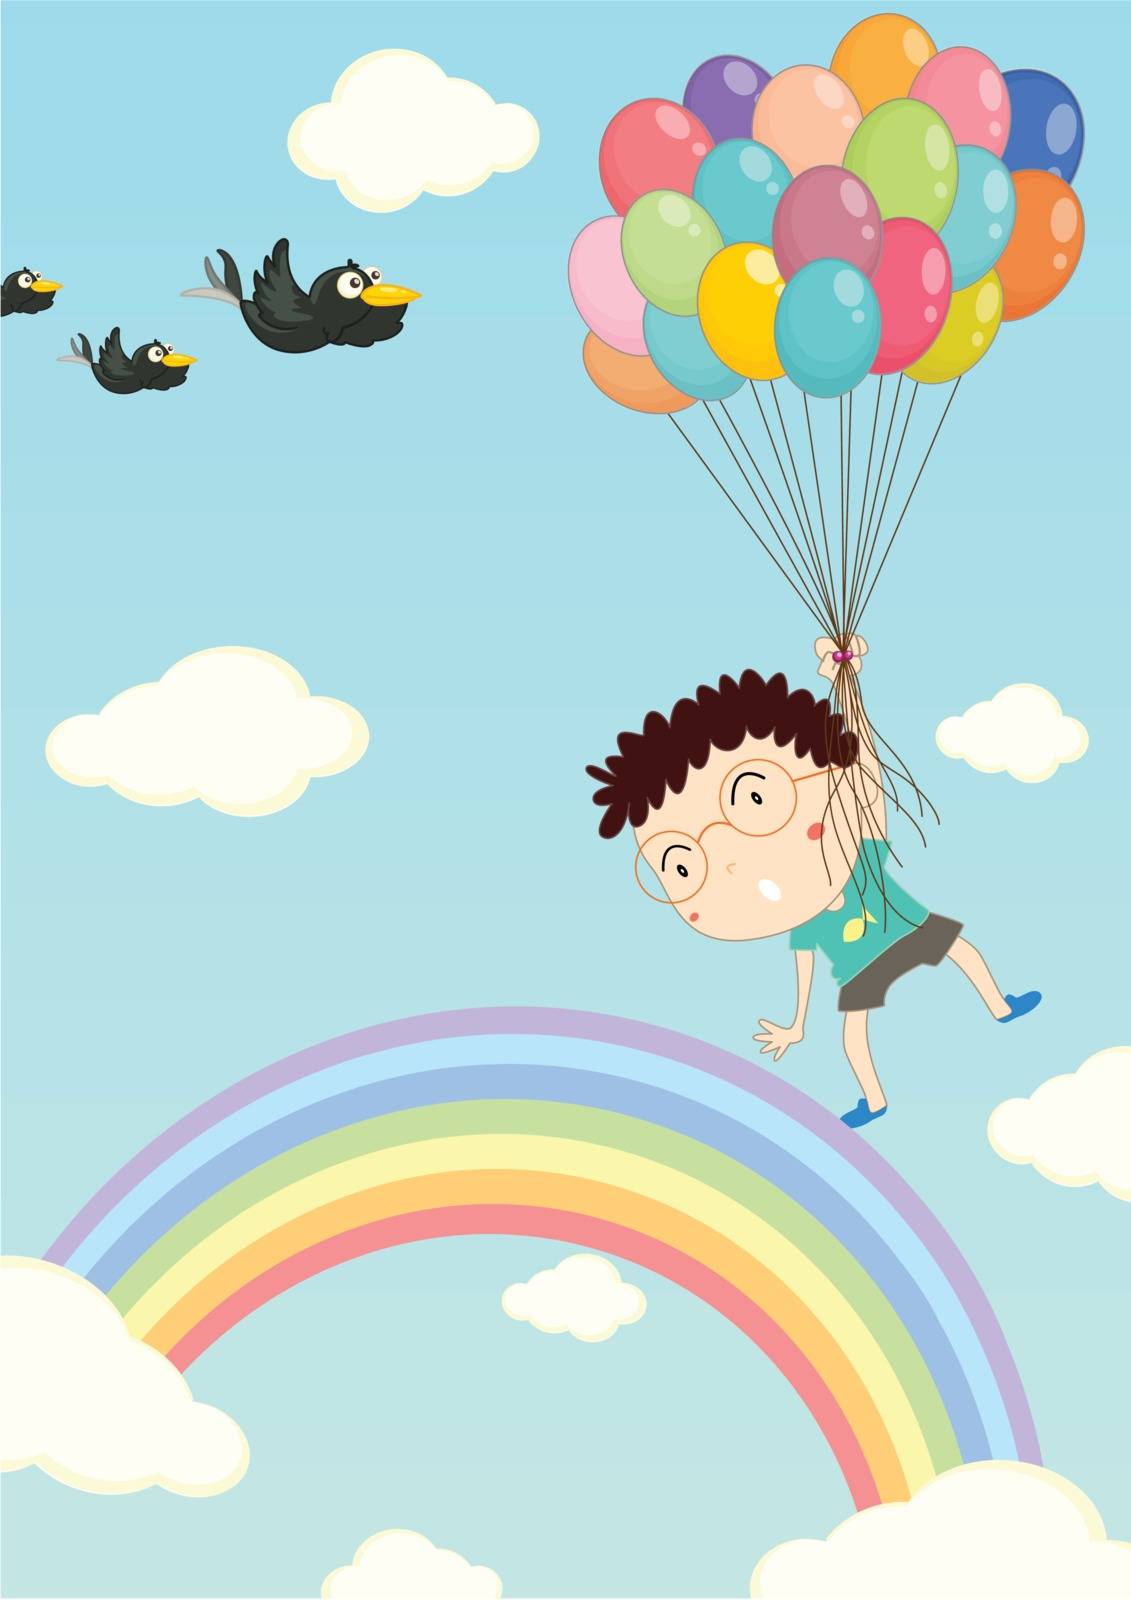 Illustration of boy and balloons